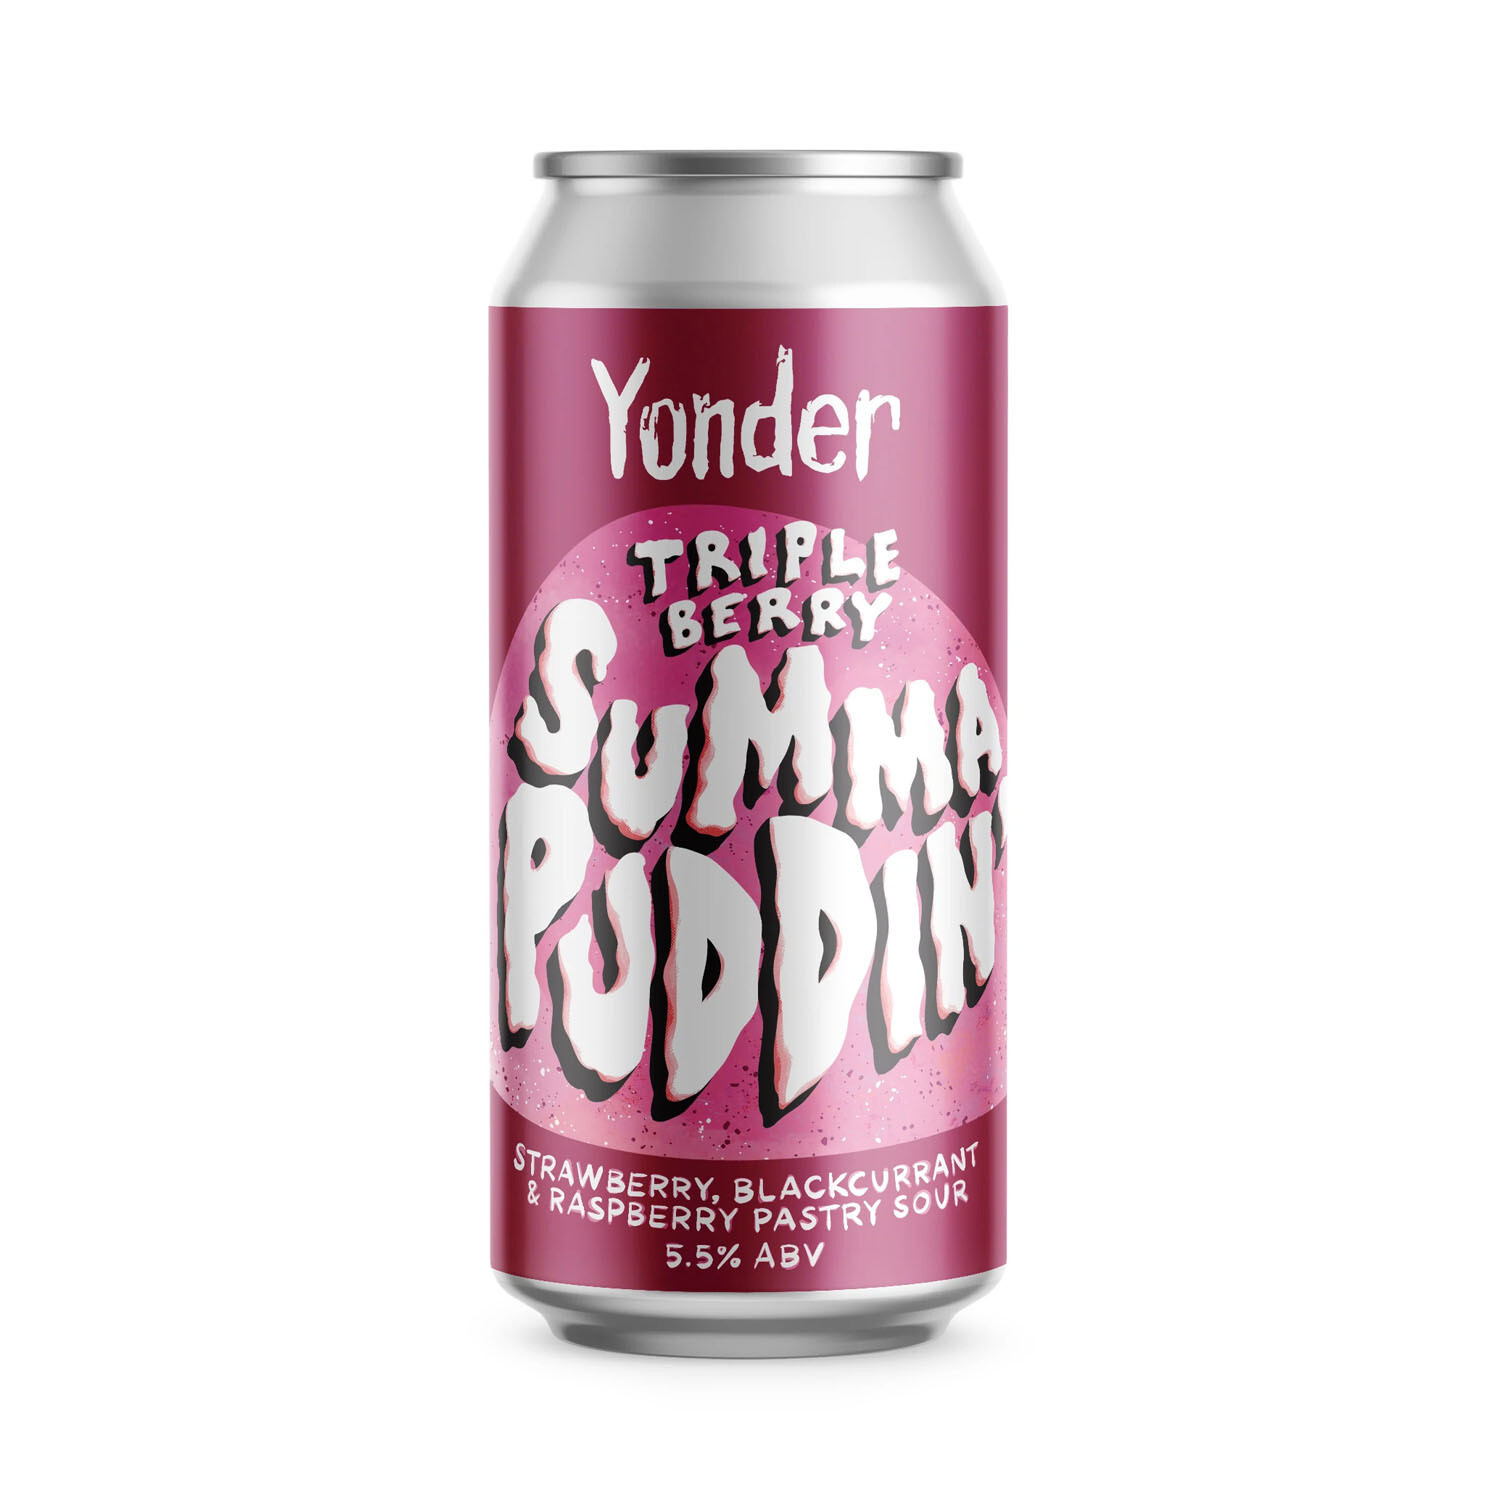 Yonder Summa Puddin' Strawberry, Raspberry and Blackcurrant Sour